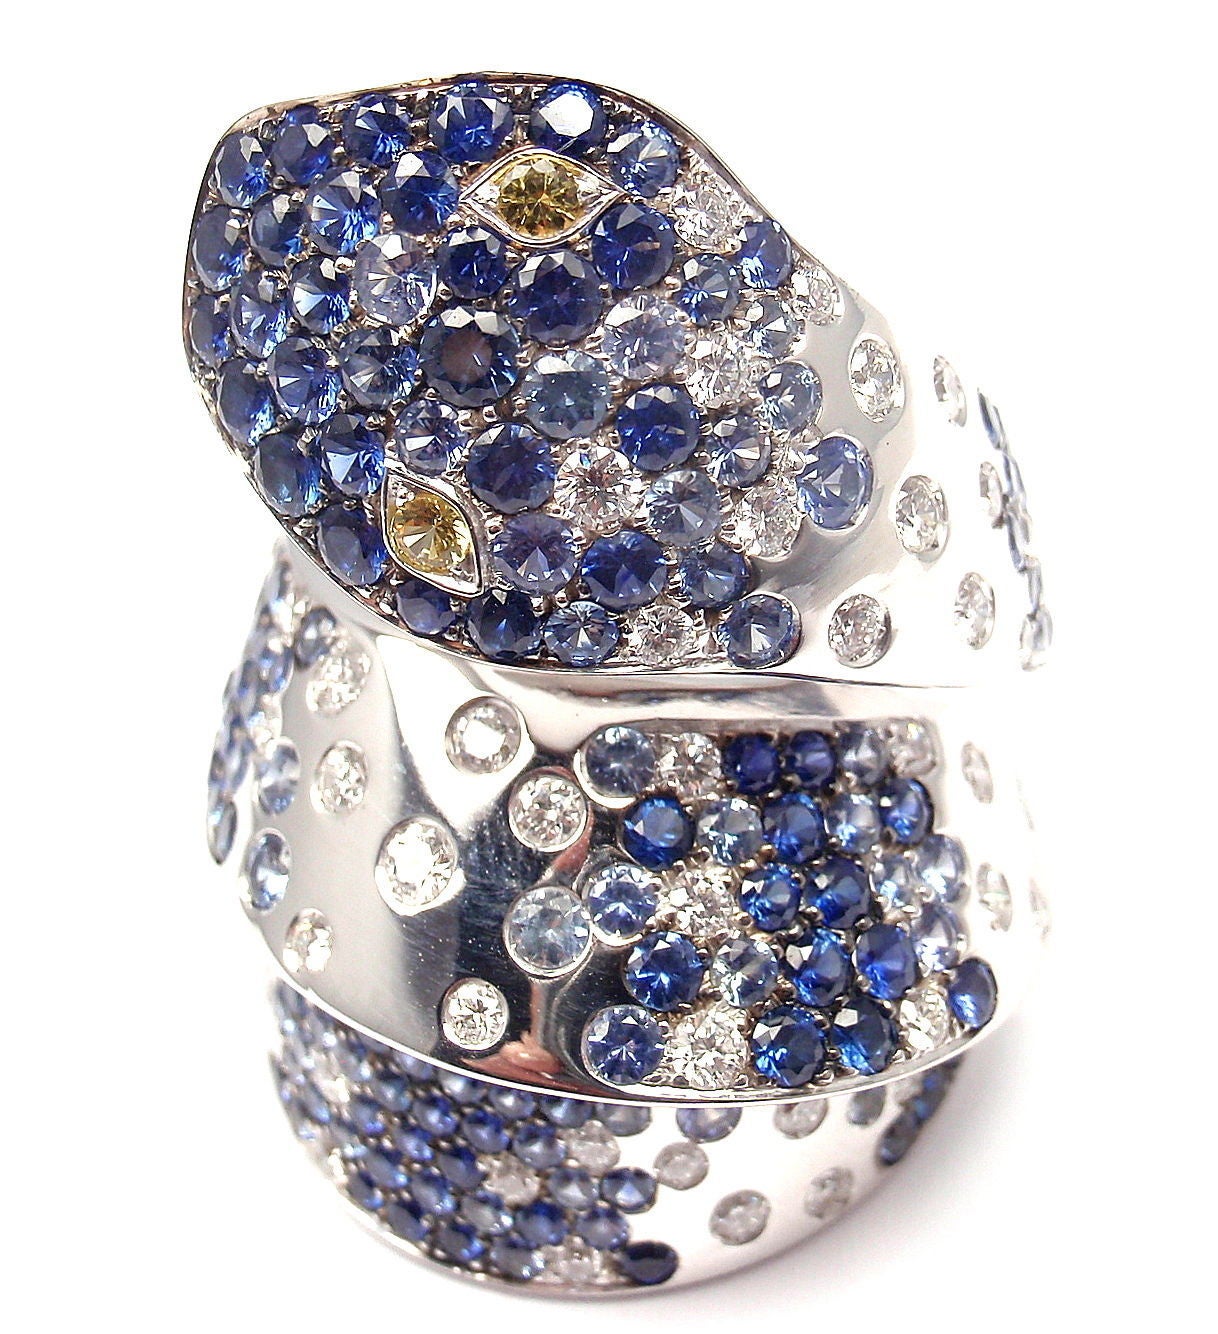 18k White Gold Diamond Sapphire Animalier Snake Ring by Pasquale Bruni.
With Round brilliant cut diamonds VS1 clarity, G color total weight approx. 1.08ct
Sapphires total weight approx. 4.28ct

Details:
Size: 6.5
Weight:  31.1 grams
Width: